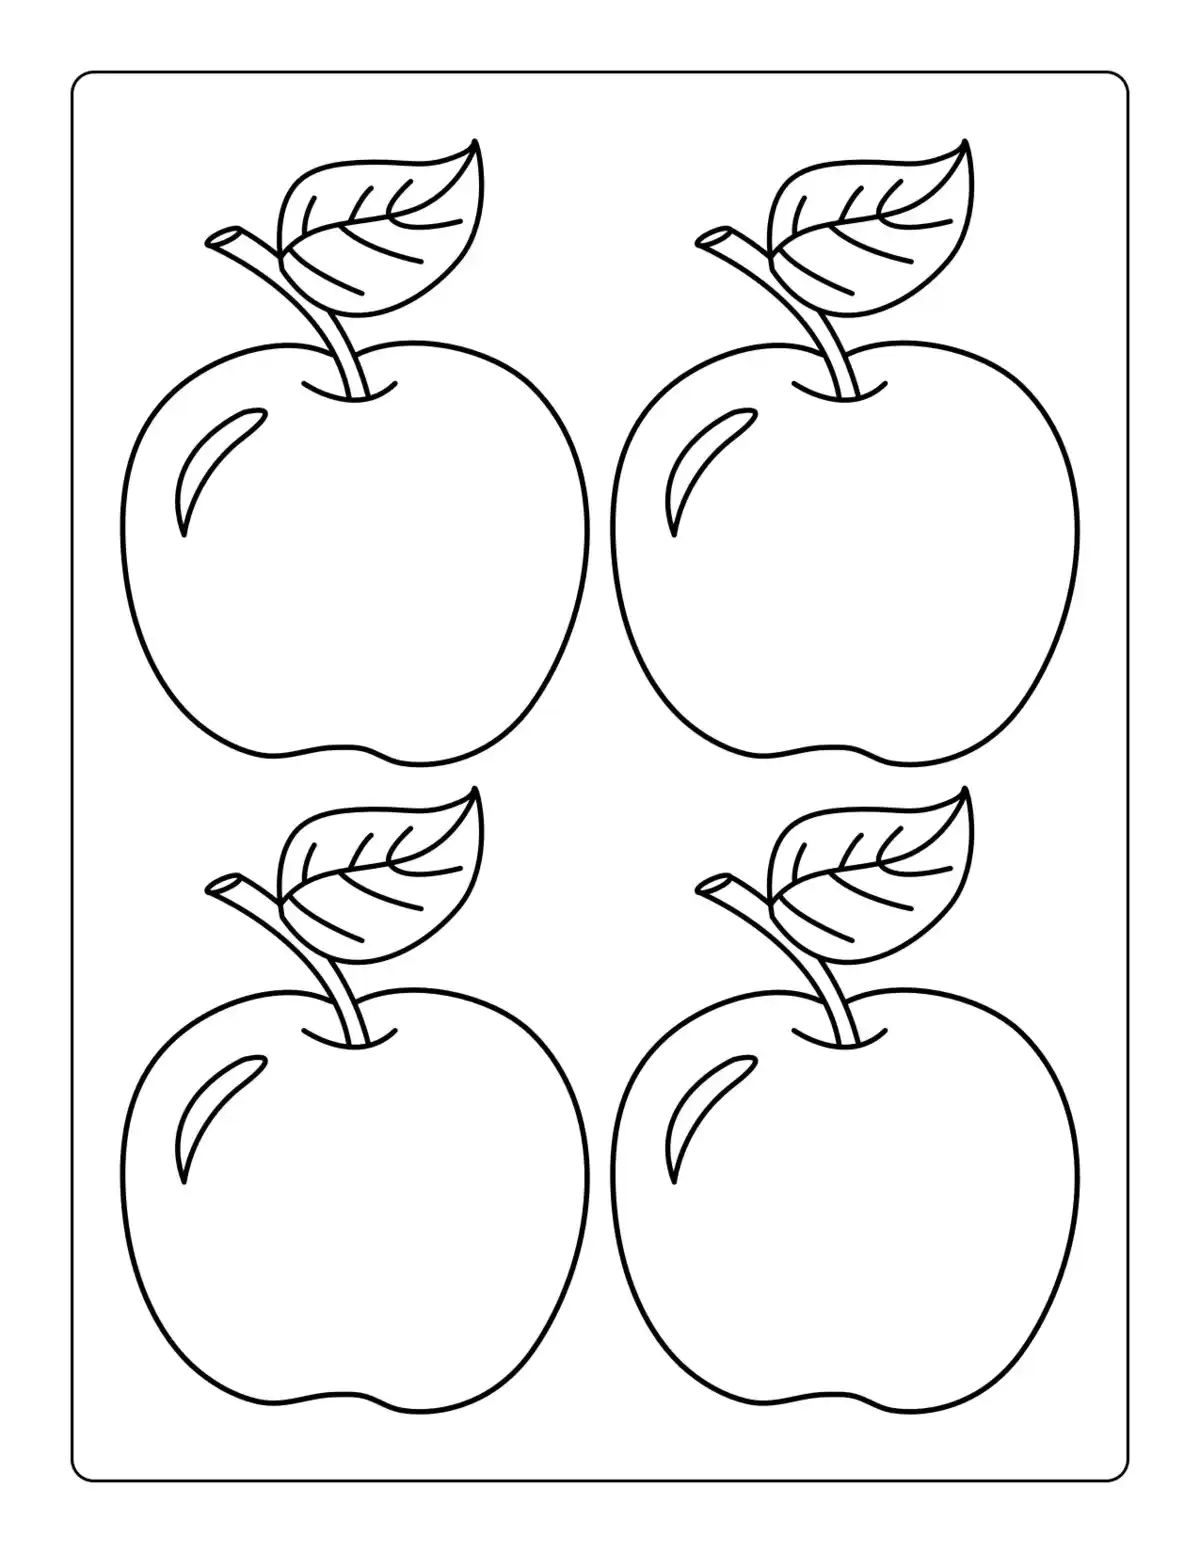 Free Coloring Pages PDF, Apple Preschoolers Medium Autumn And Fall Coloring Pages Pdf